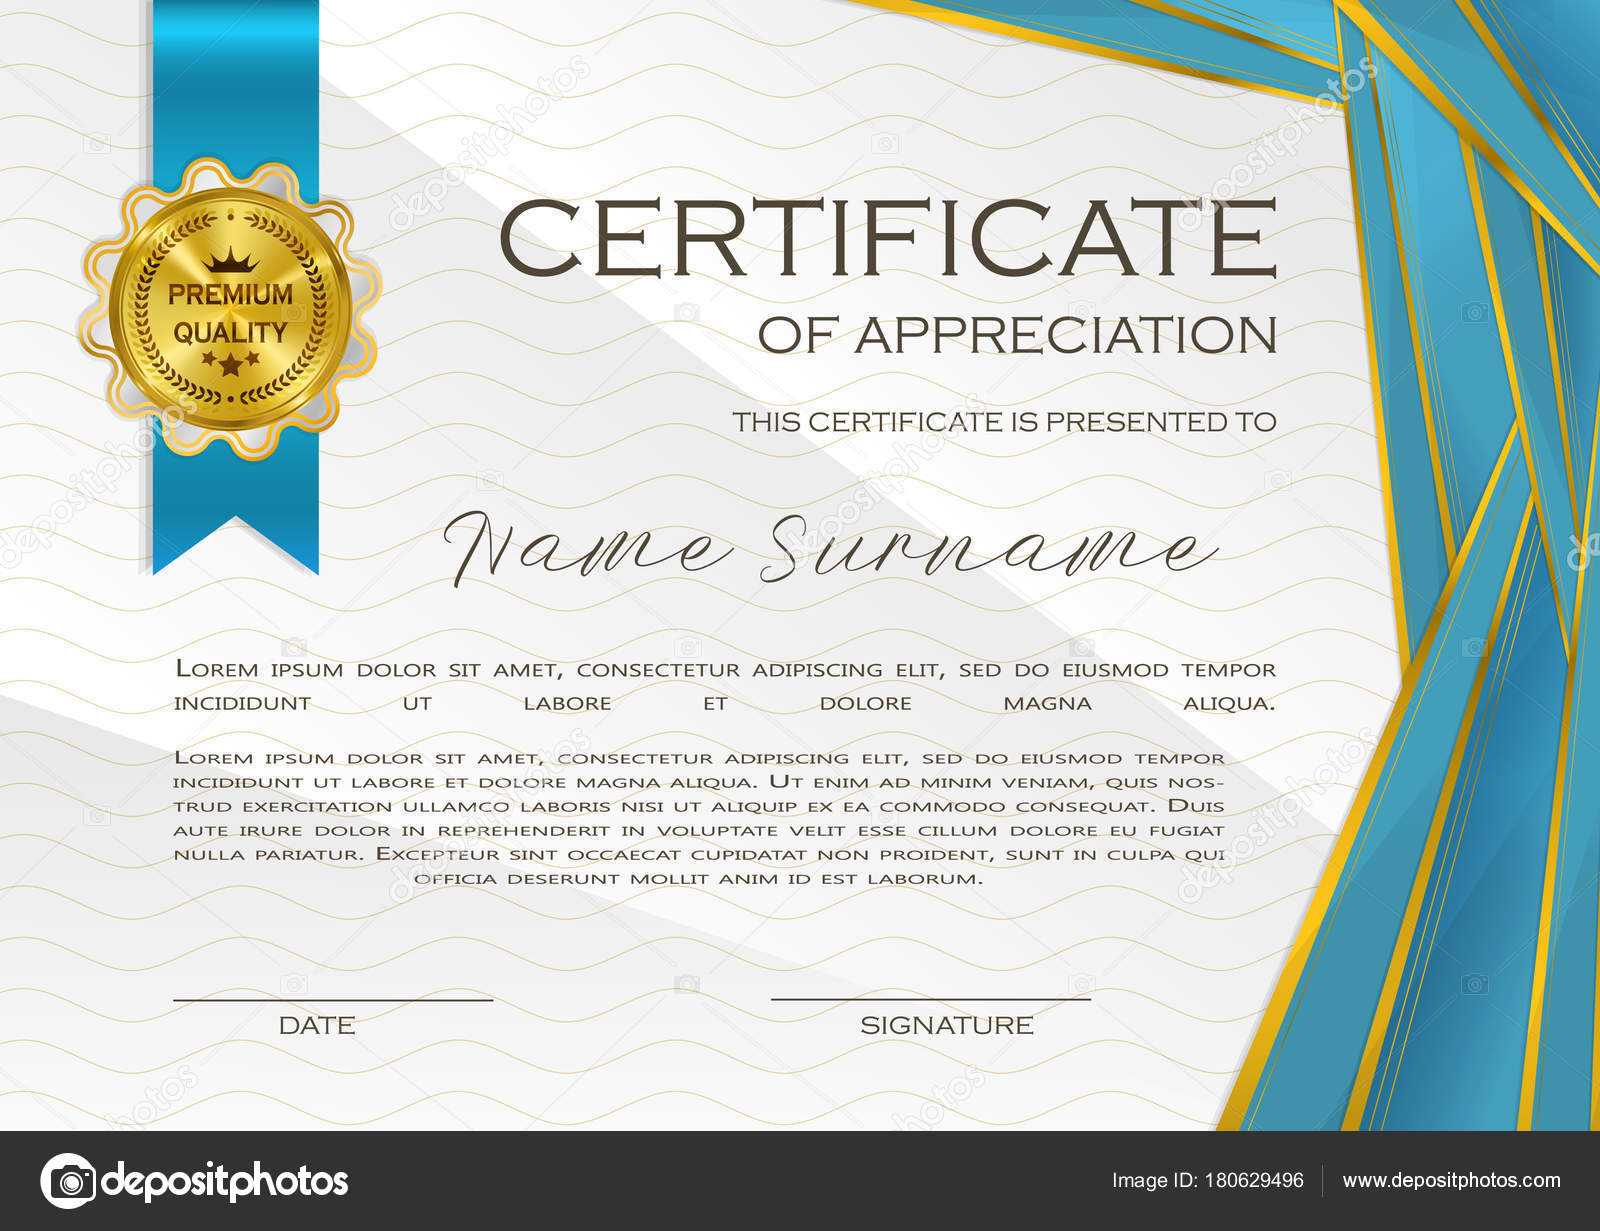 Qualification Certificate Appreciation Design Elegant Luxury Intended For Qualification Certificate Template